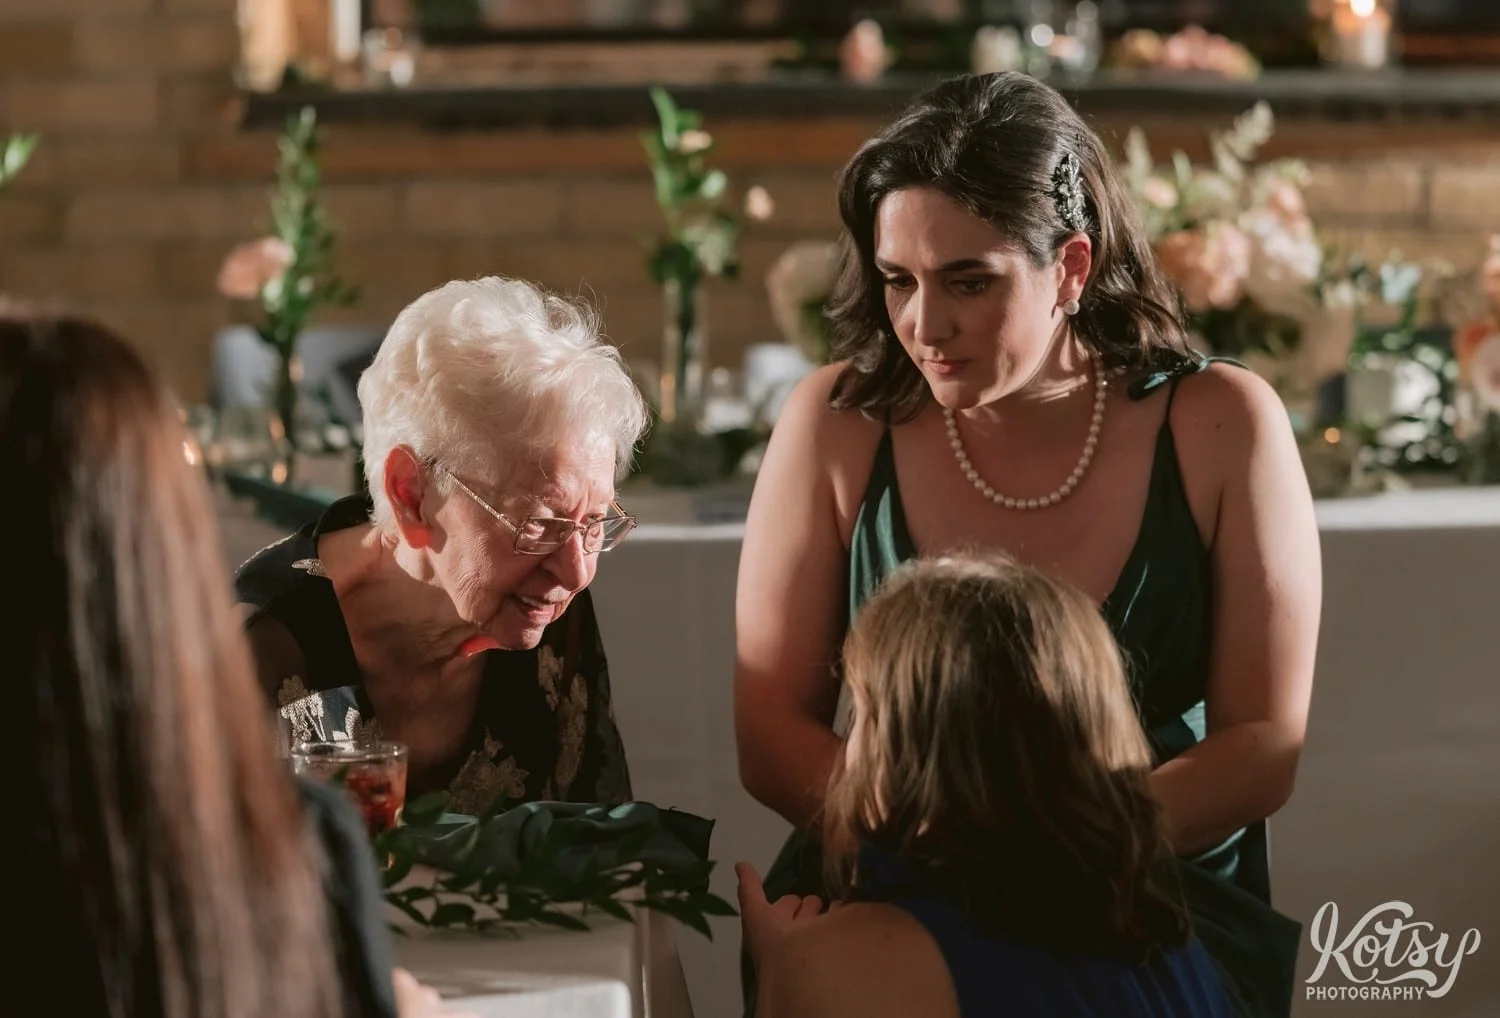 An elderly woman looks down to a woman crouch speaking to her during a Second Floor Events wedding reception in Toronto, Canada.